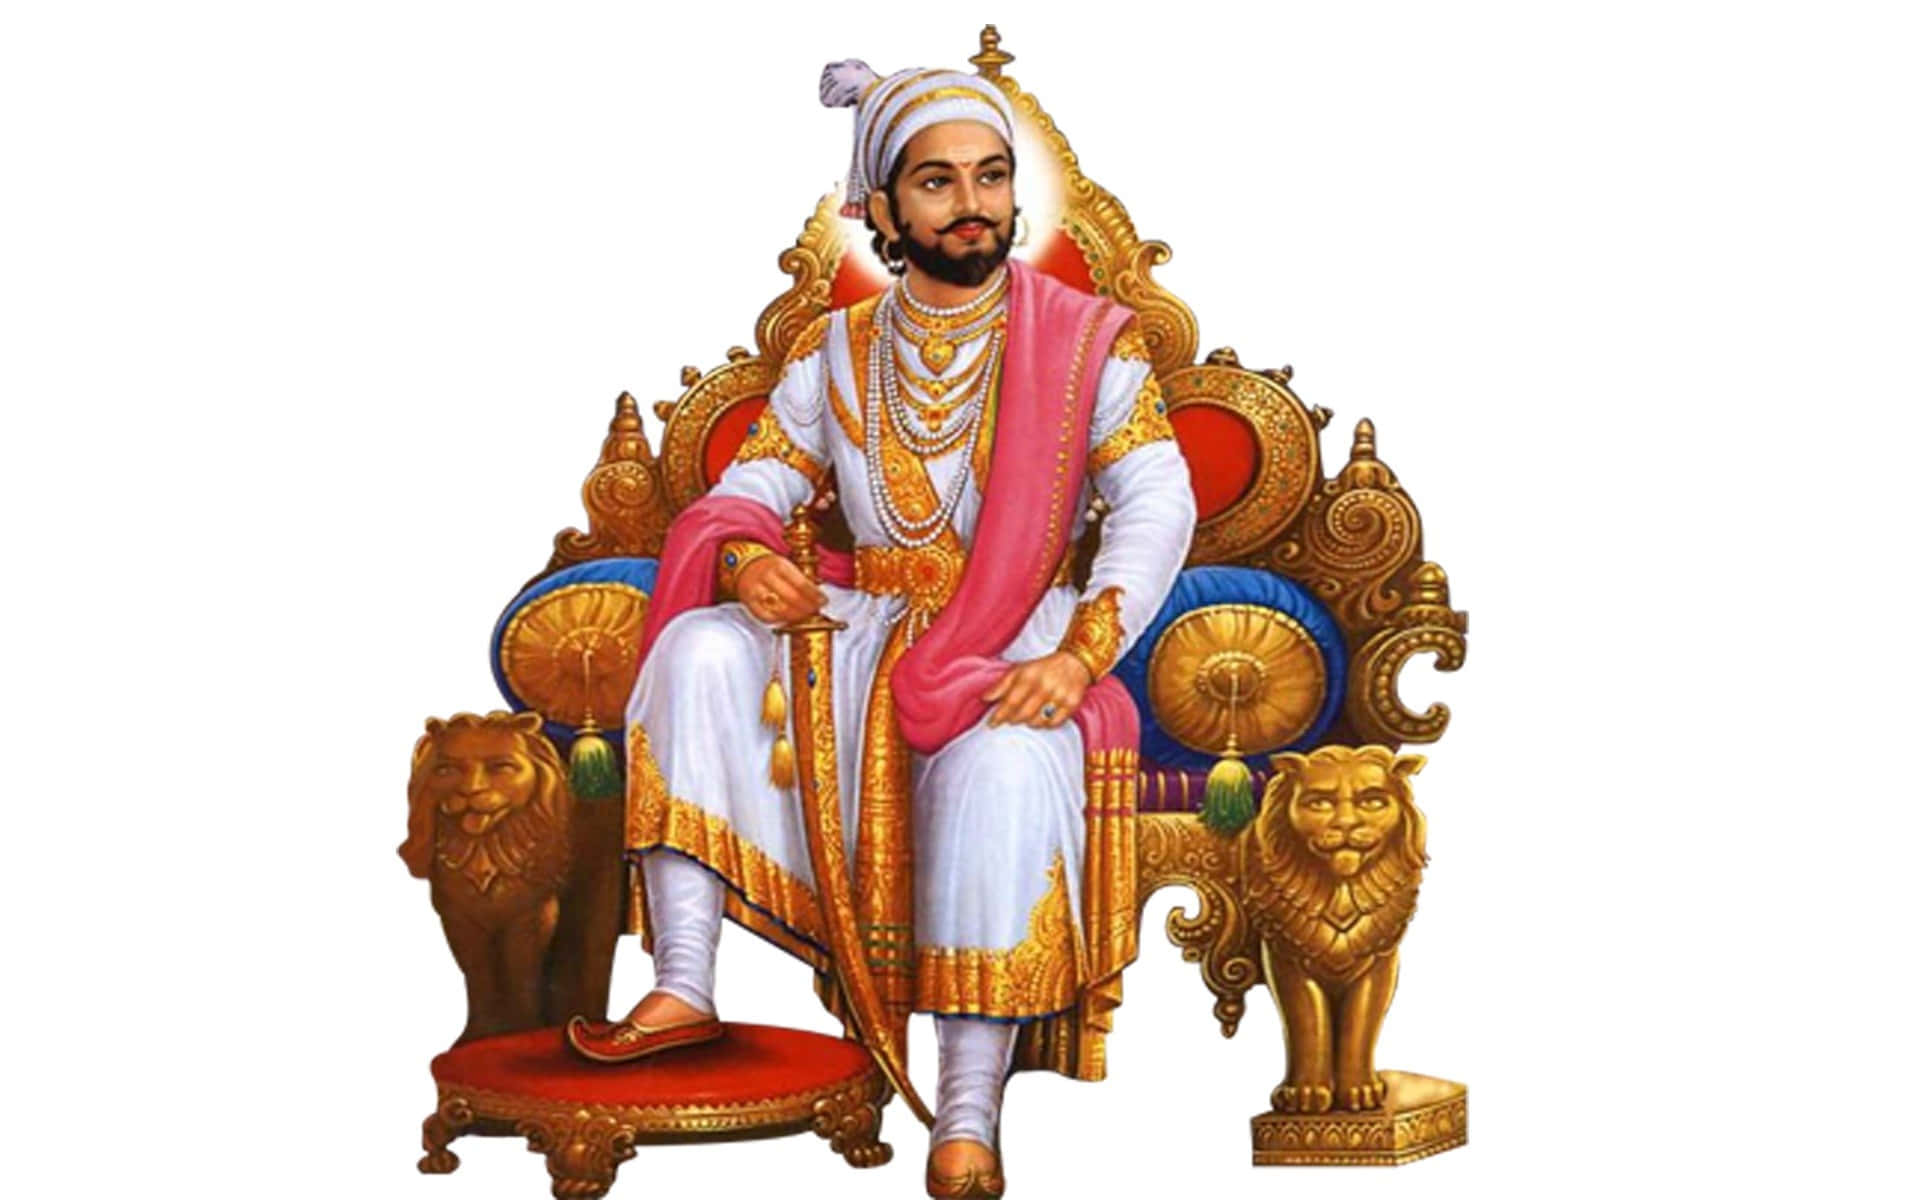 One of the most famous and admired figures in Indian history - Shivaji Maharaj